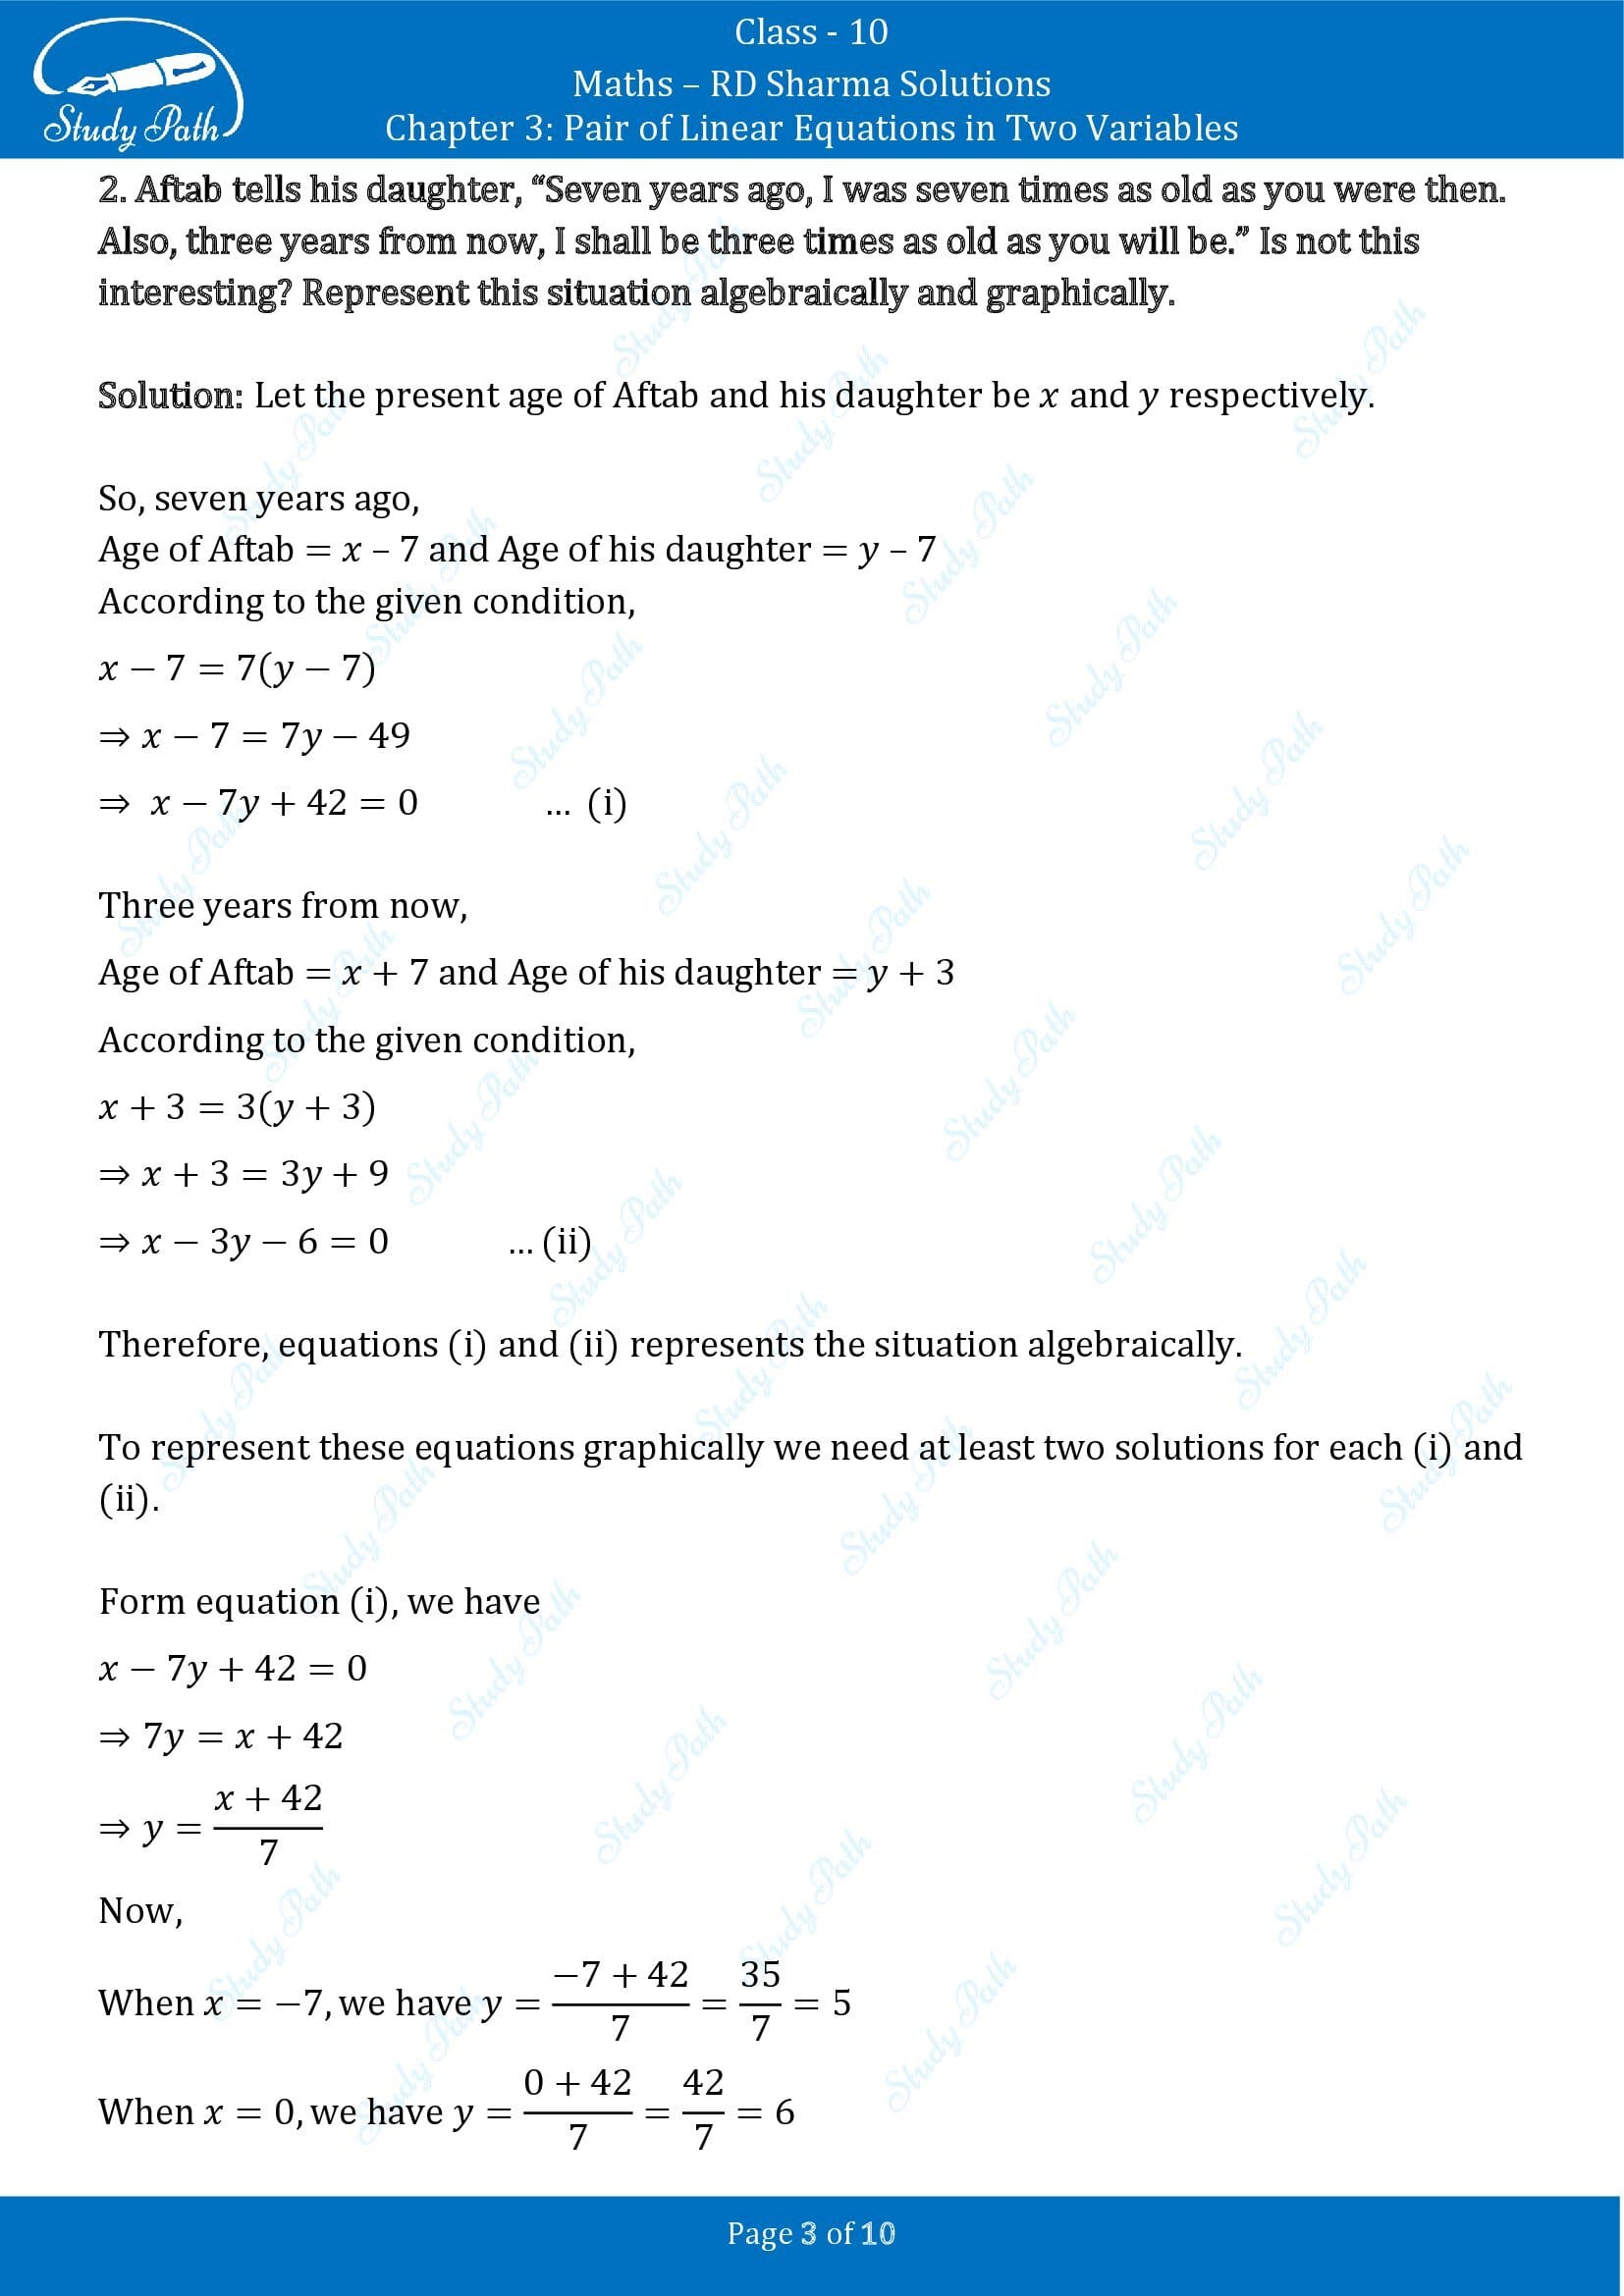 RD Sharma Solutions Class 10 Chapter 3 Pair of Linear Equations in Two Variables Exercise 3.1 00003